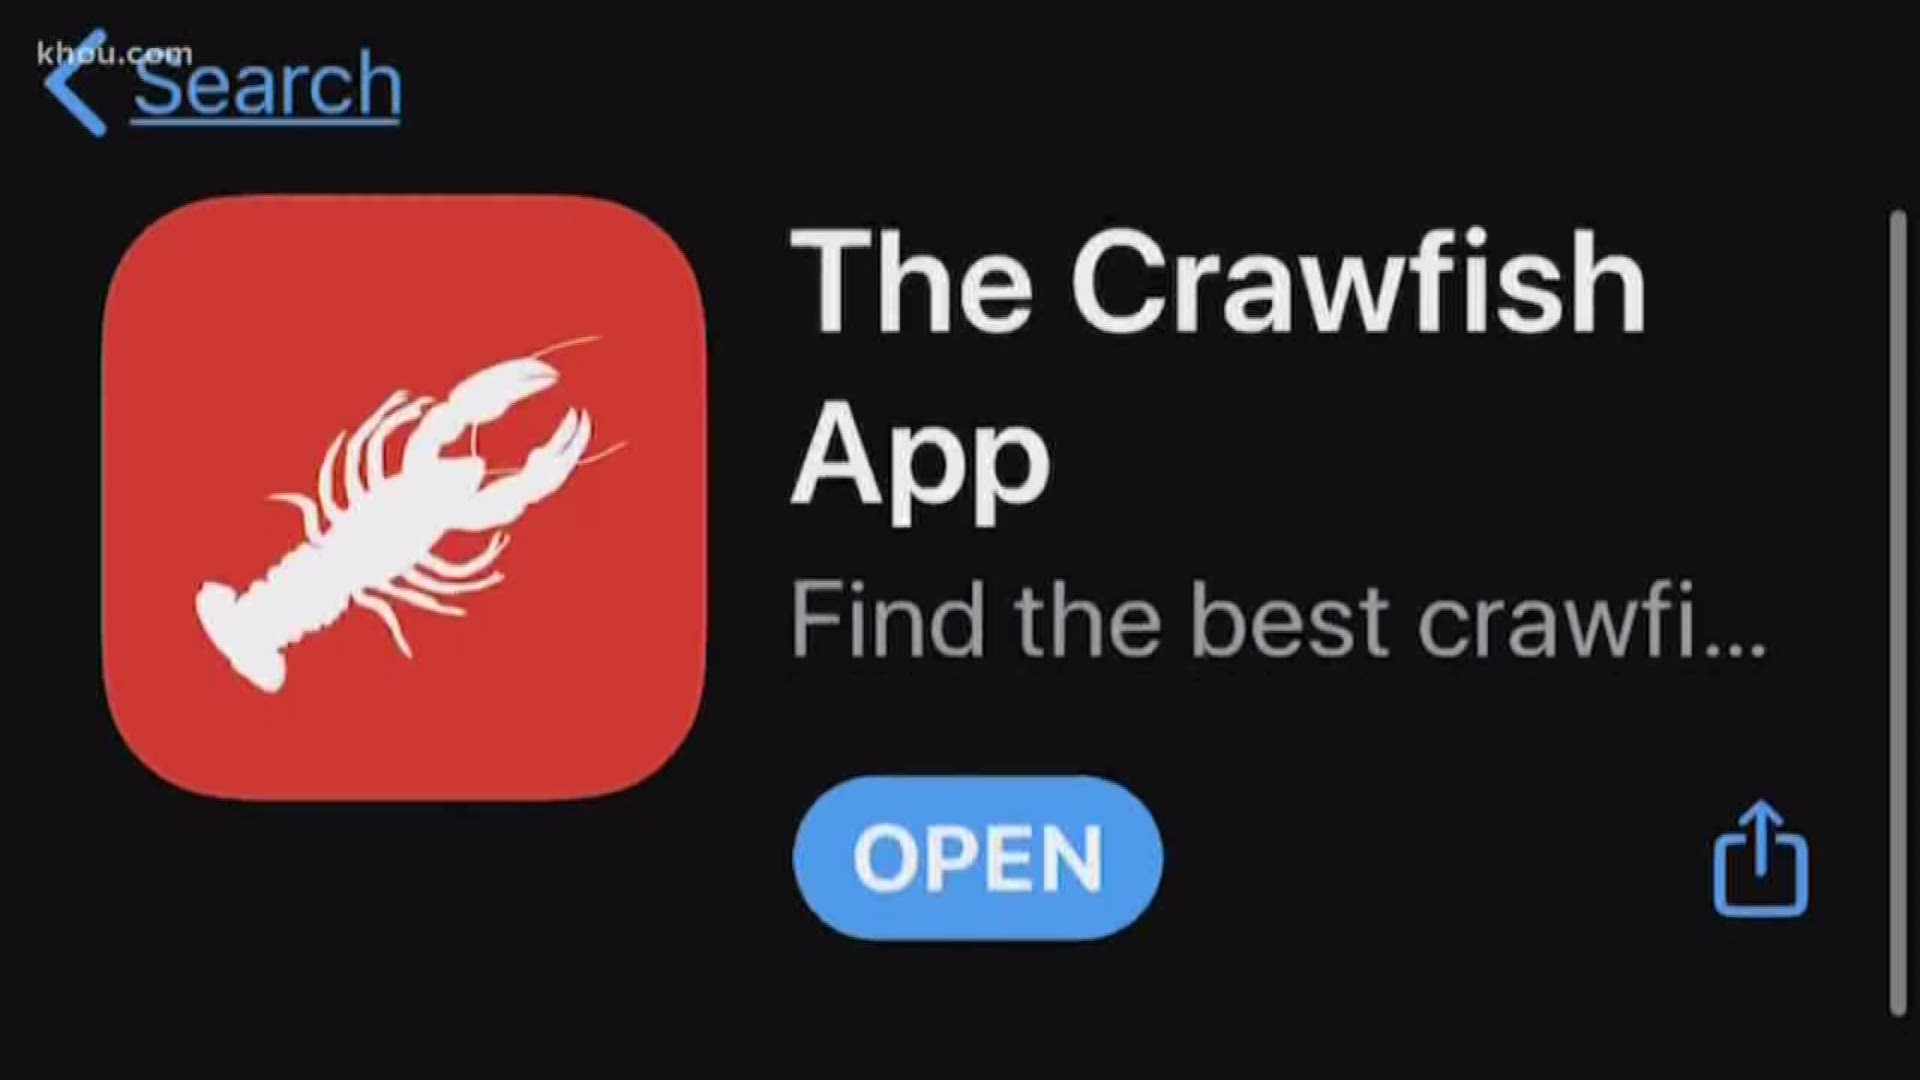 This app will help you find Houston's biggest, best, cheapest crawfish.